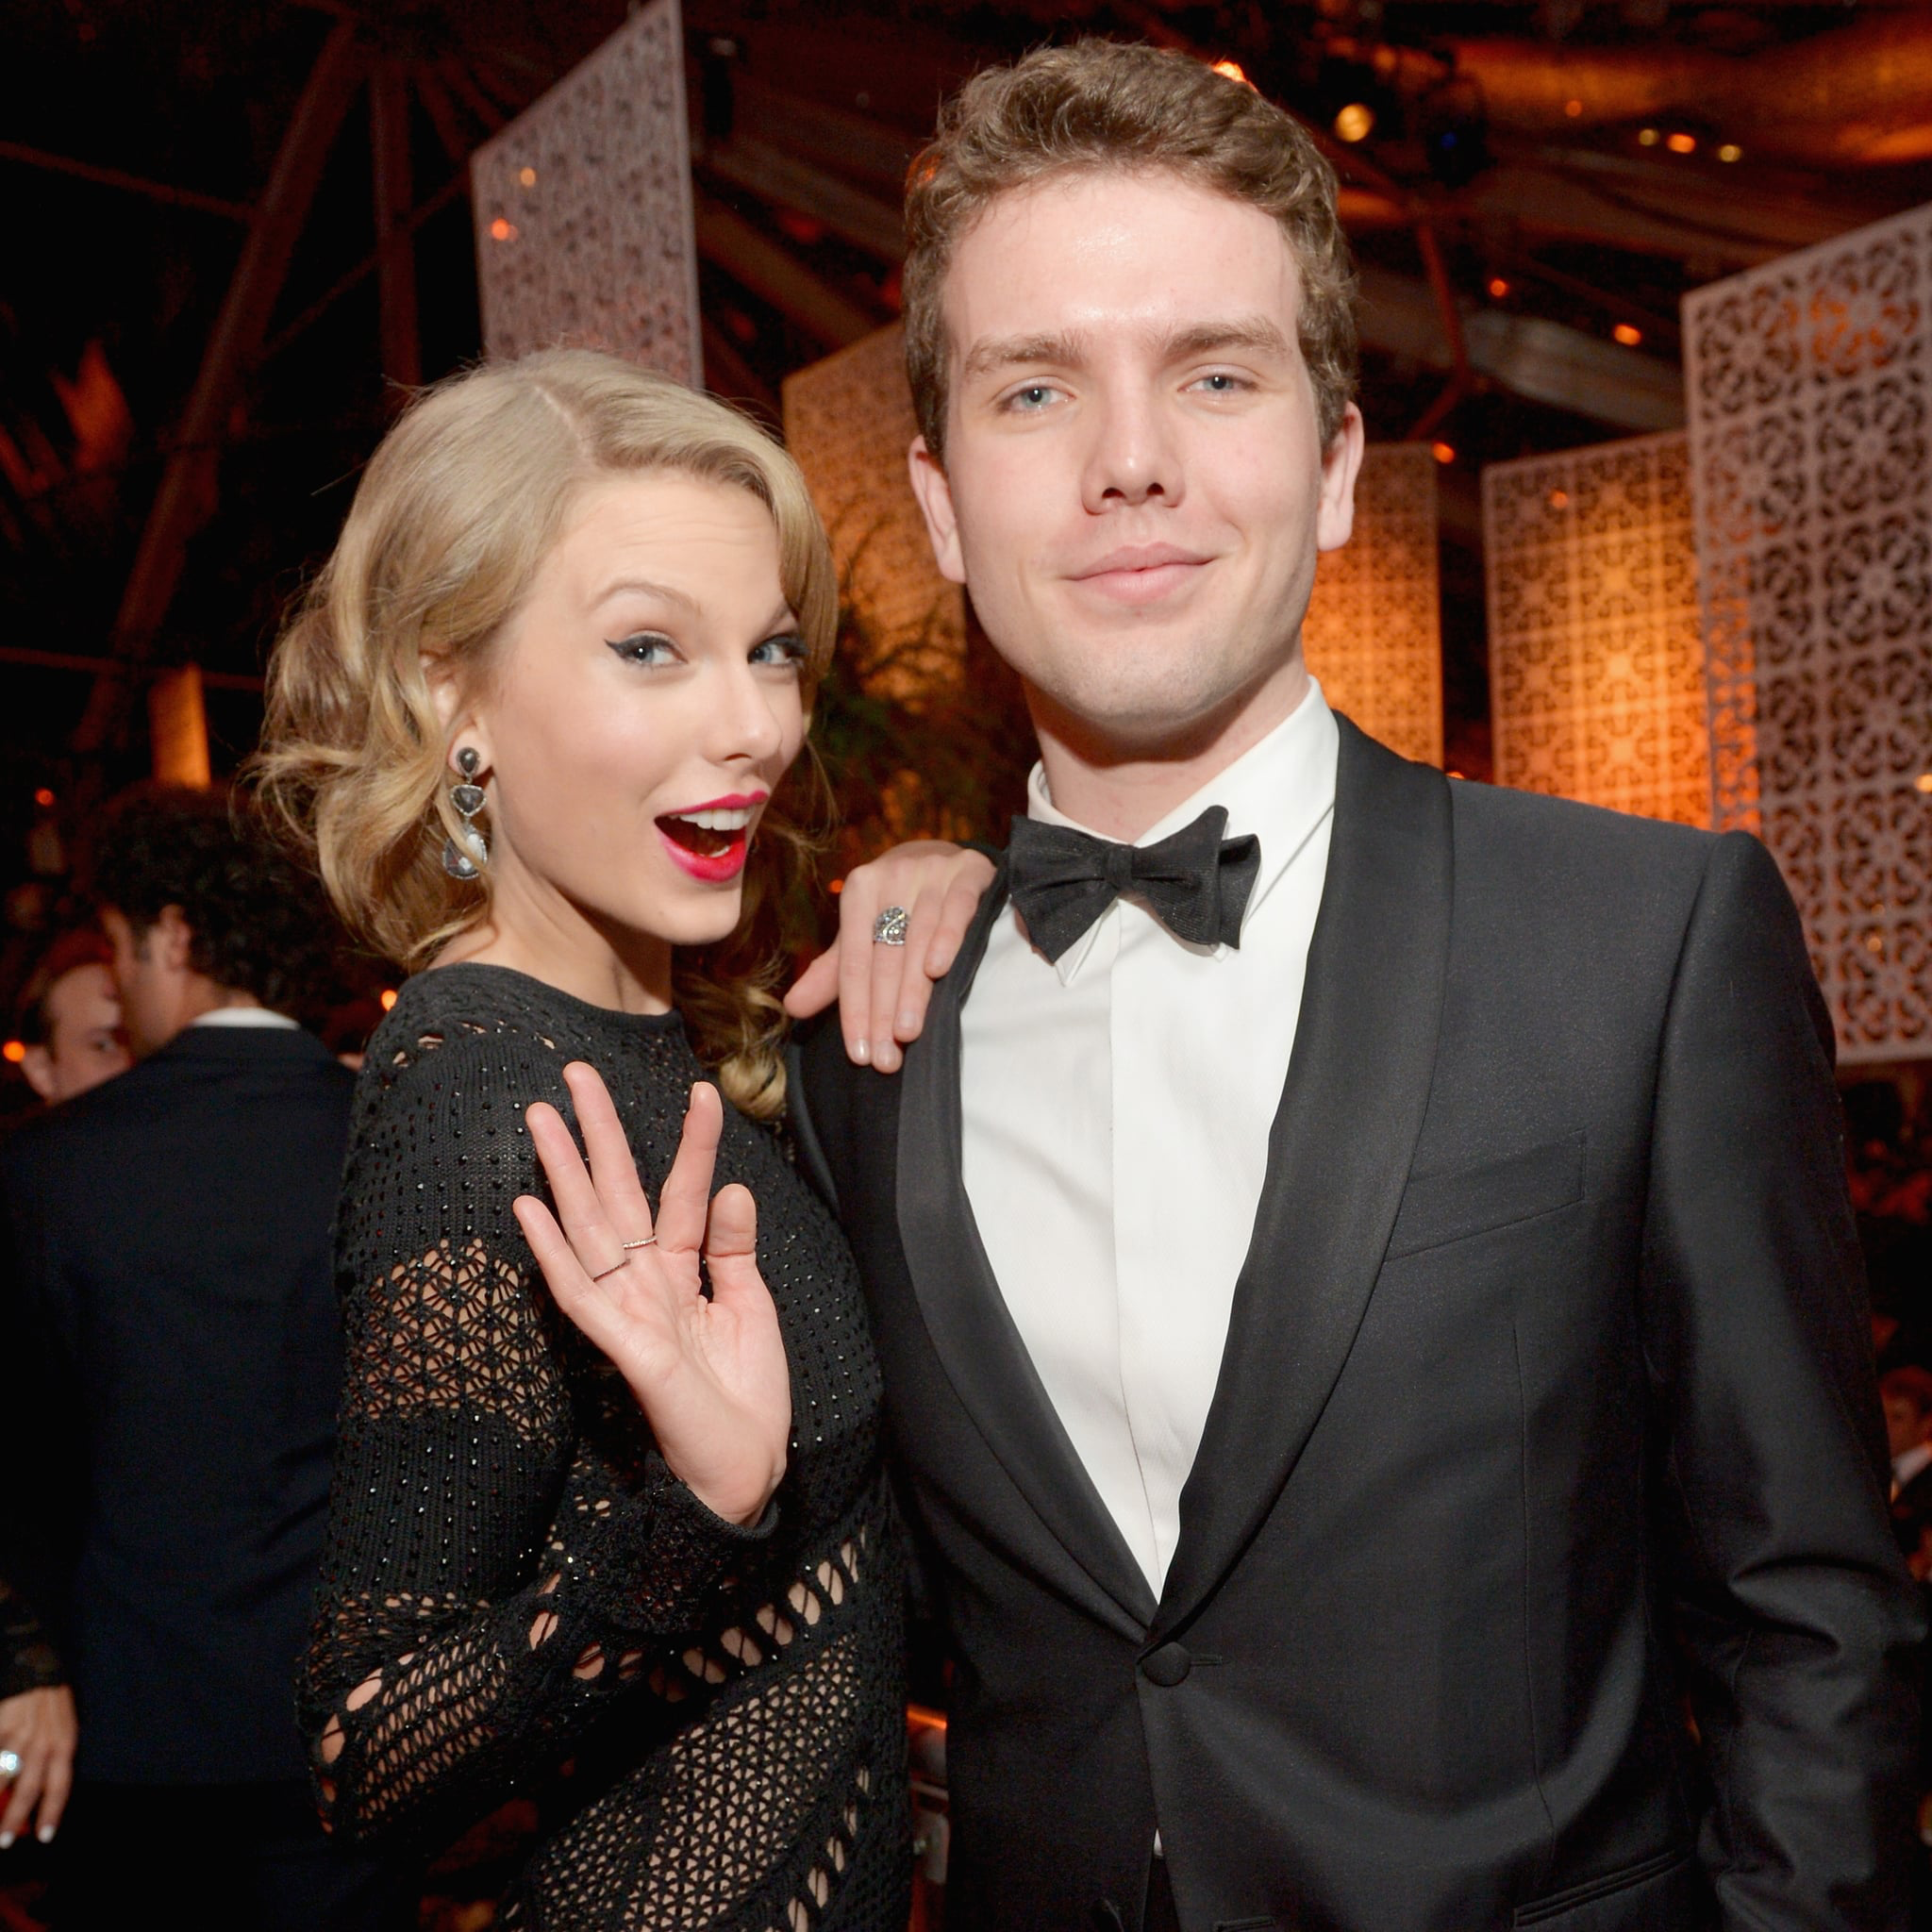 Taylor Swift Siblings: How Many Siblings Does Taylor Swift Have?